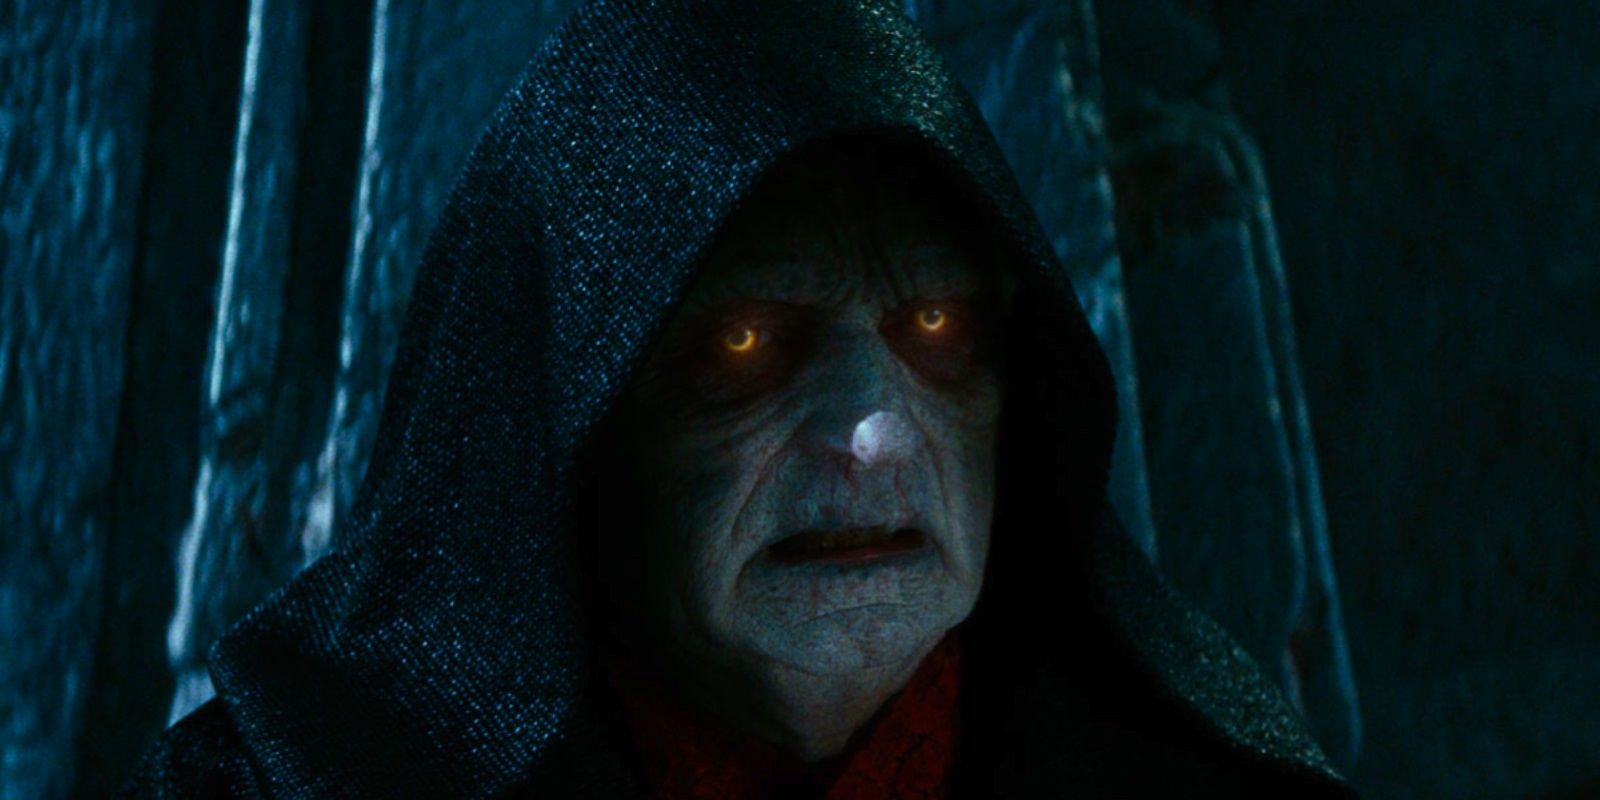 Emperor Palpatine with glowing yellow eyes in The Rise of Skywalker